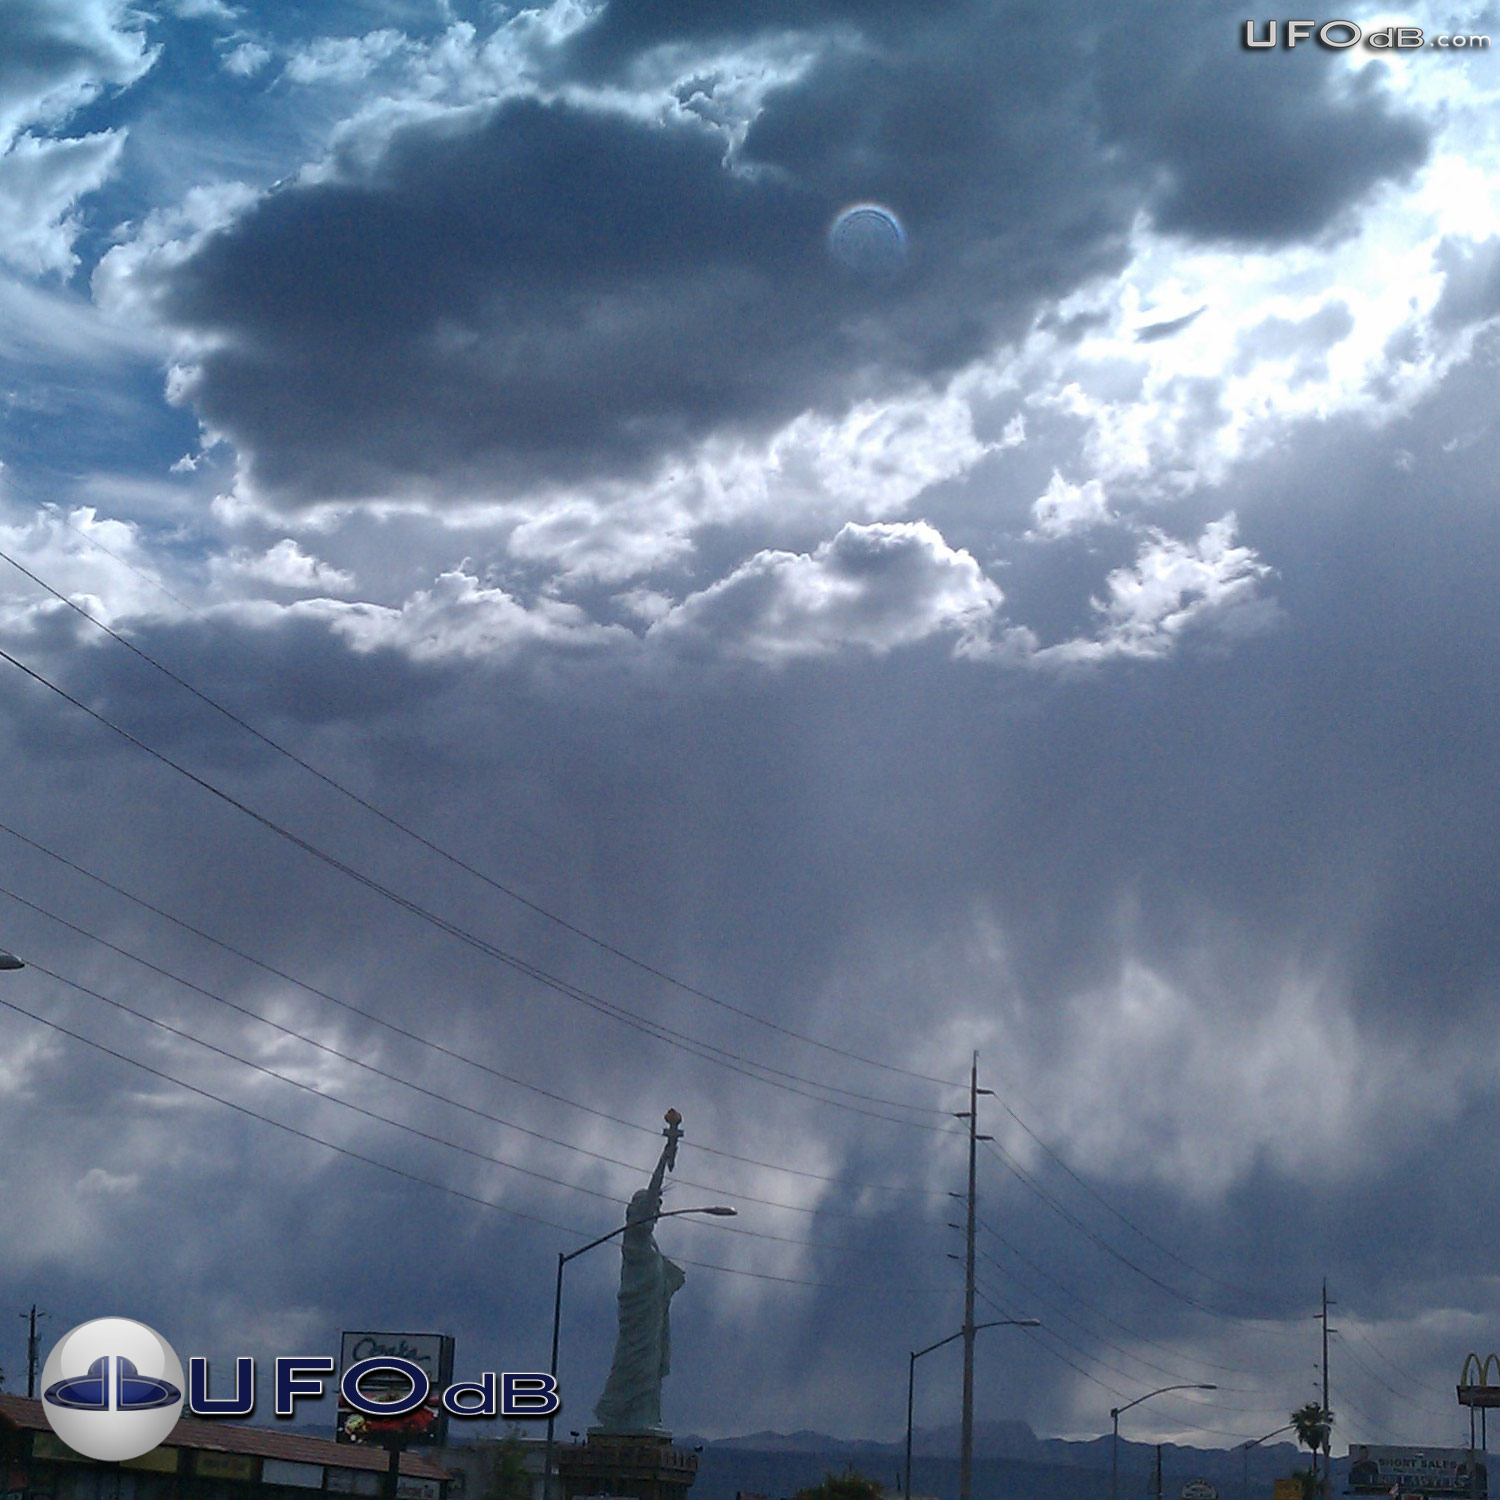 Large UFO coming through a Cloud in Las Vegas Nevada USA | May 13 2011 UFO Picture #334-1